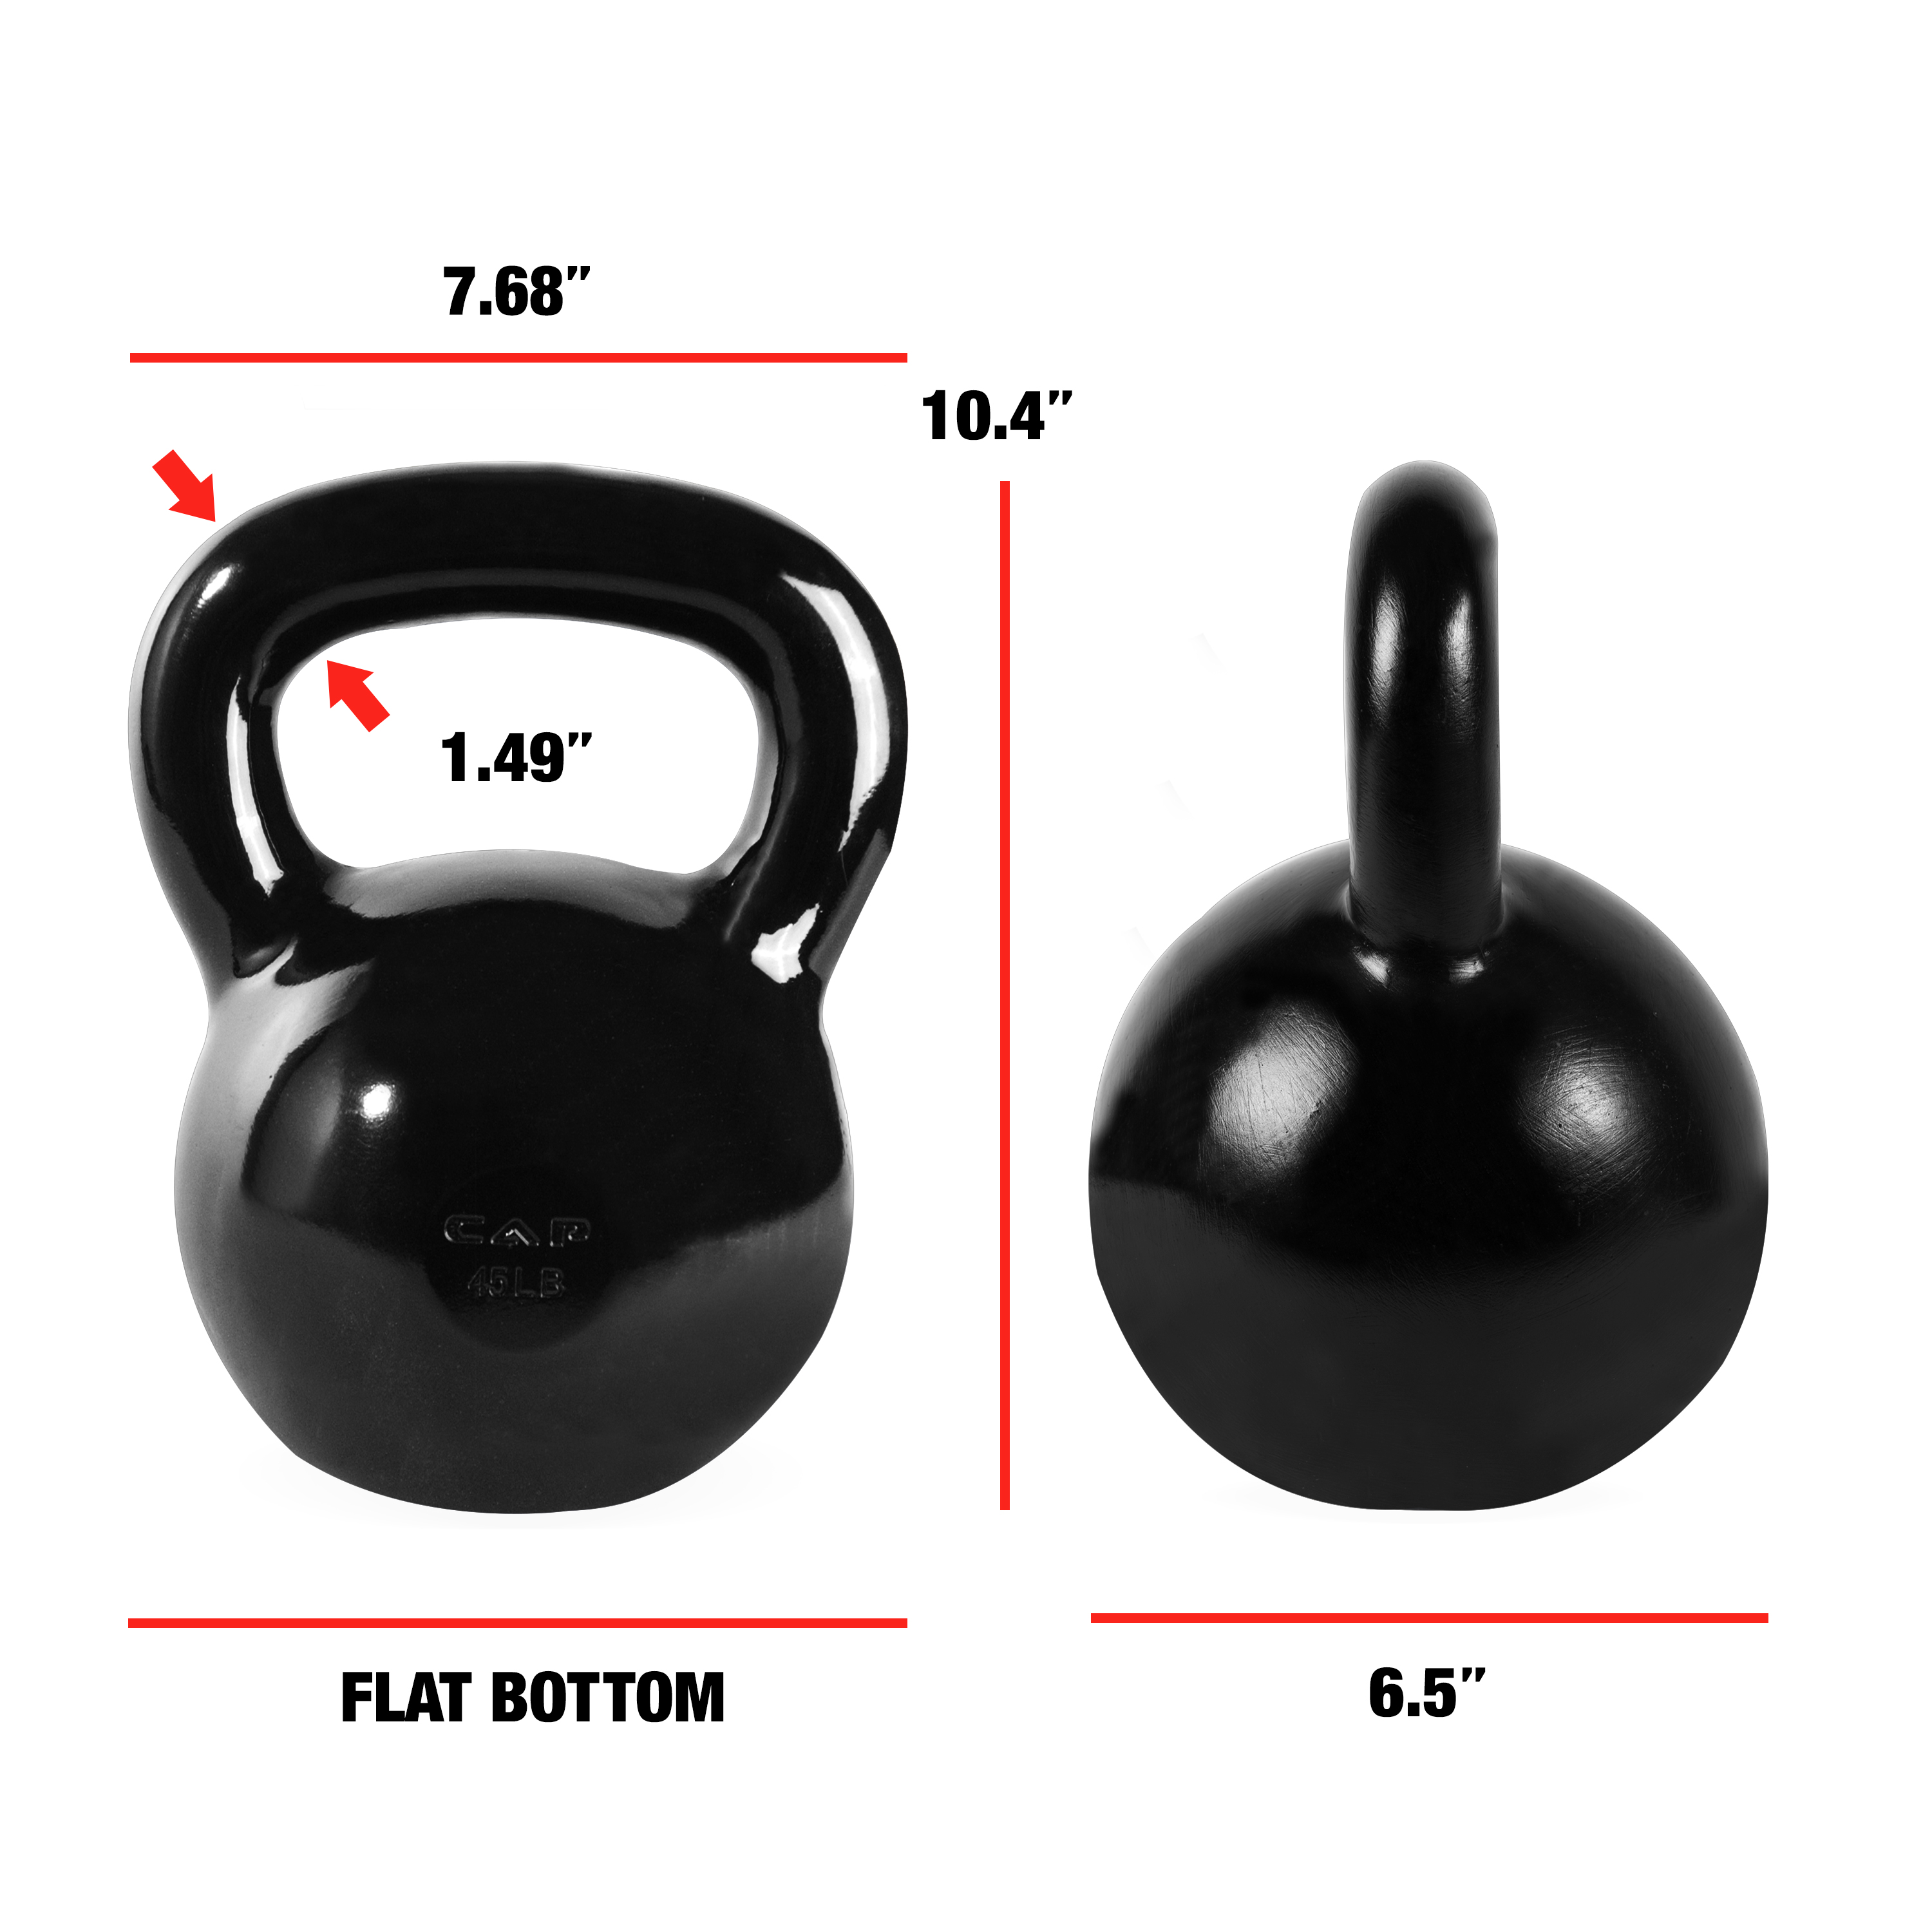 CAP Barbell Cast Iron Kettlebell, Black 45LBS - image 2 of 8